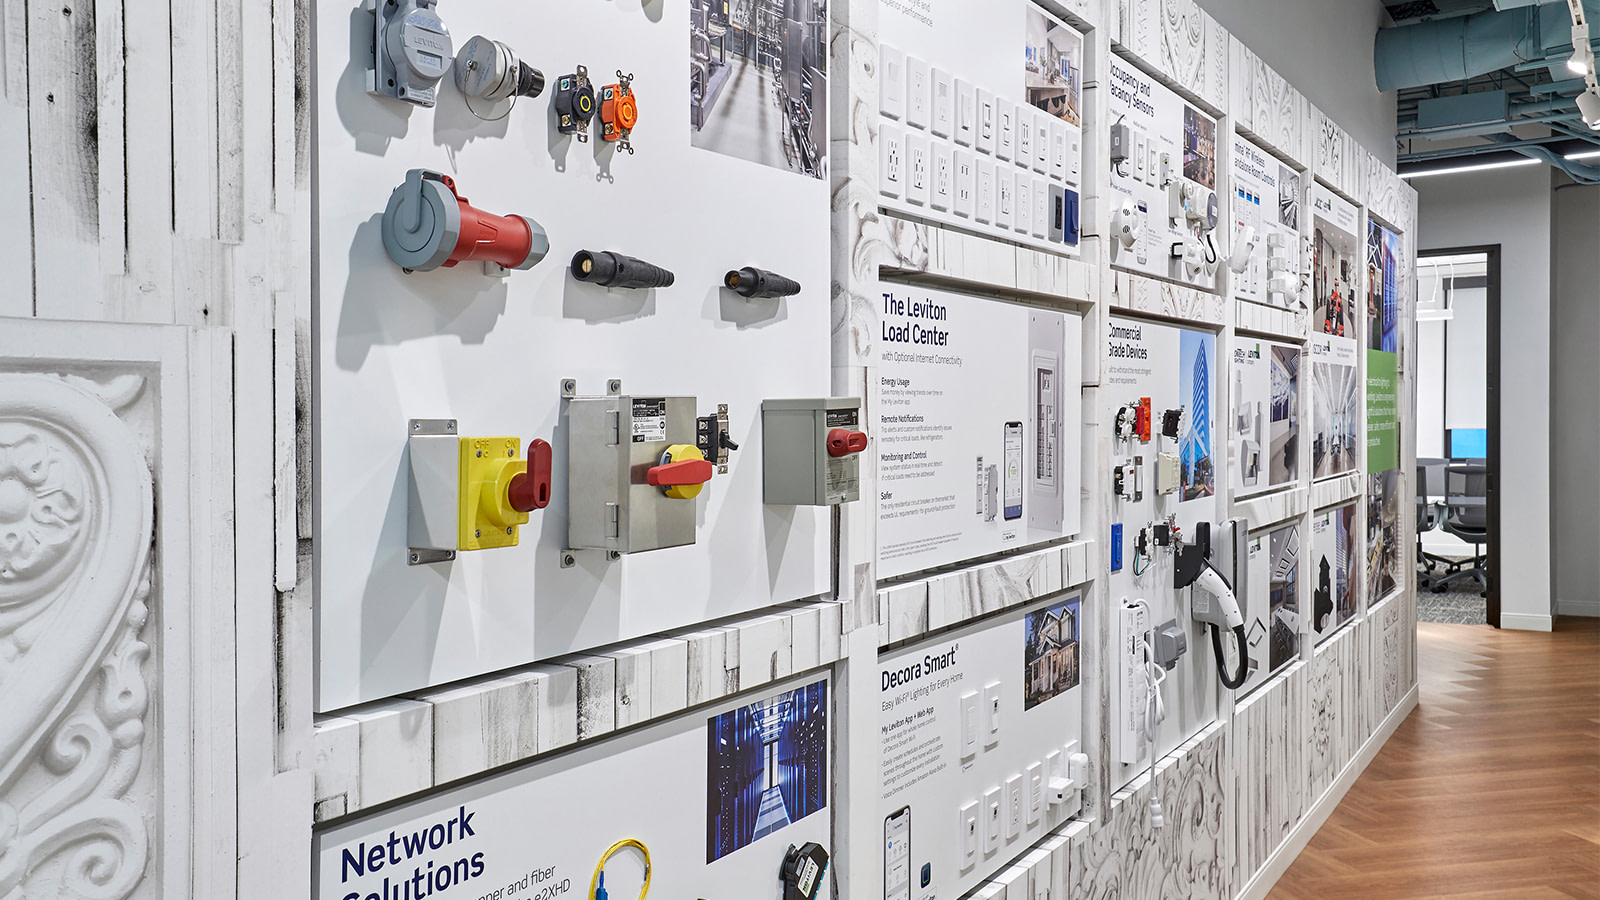 An experiential graphic design display wall at Leviton's showroom